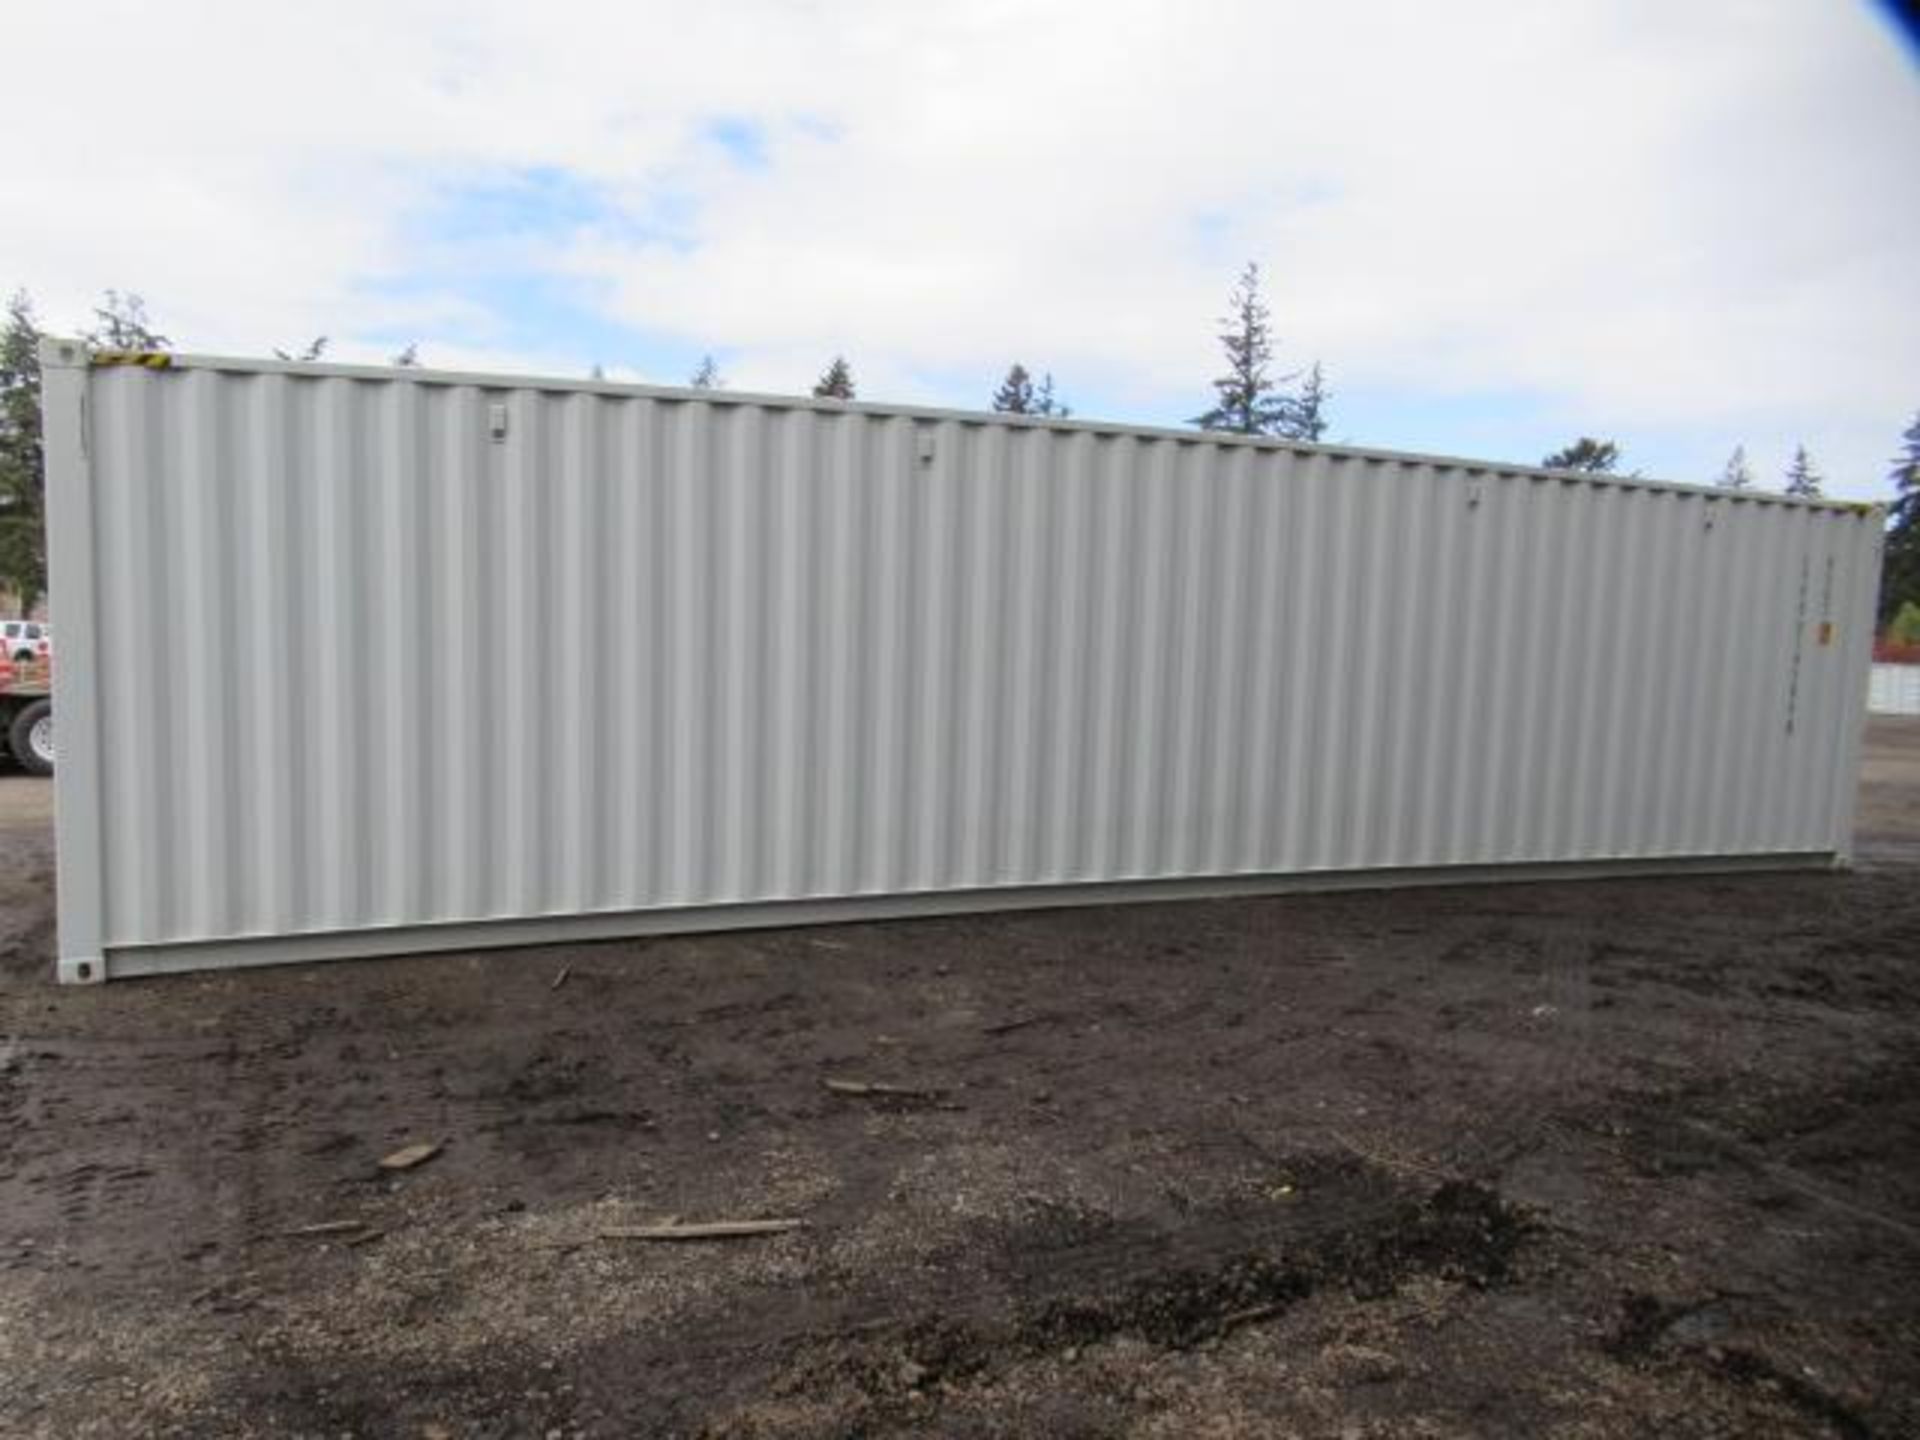 2024 40' HIGH CUBE SHIPPING CONTAINER W/ (4) SIDE DOORS, SER#: LYPU0145868 (UNUSED) - Image 3 of 6